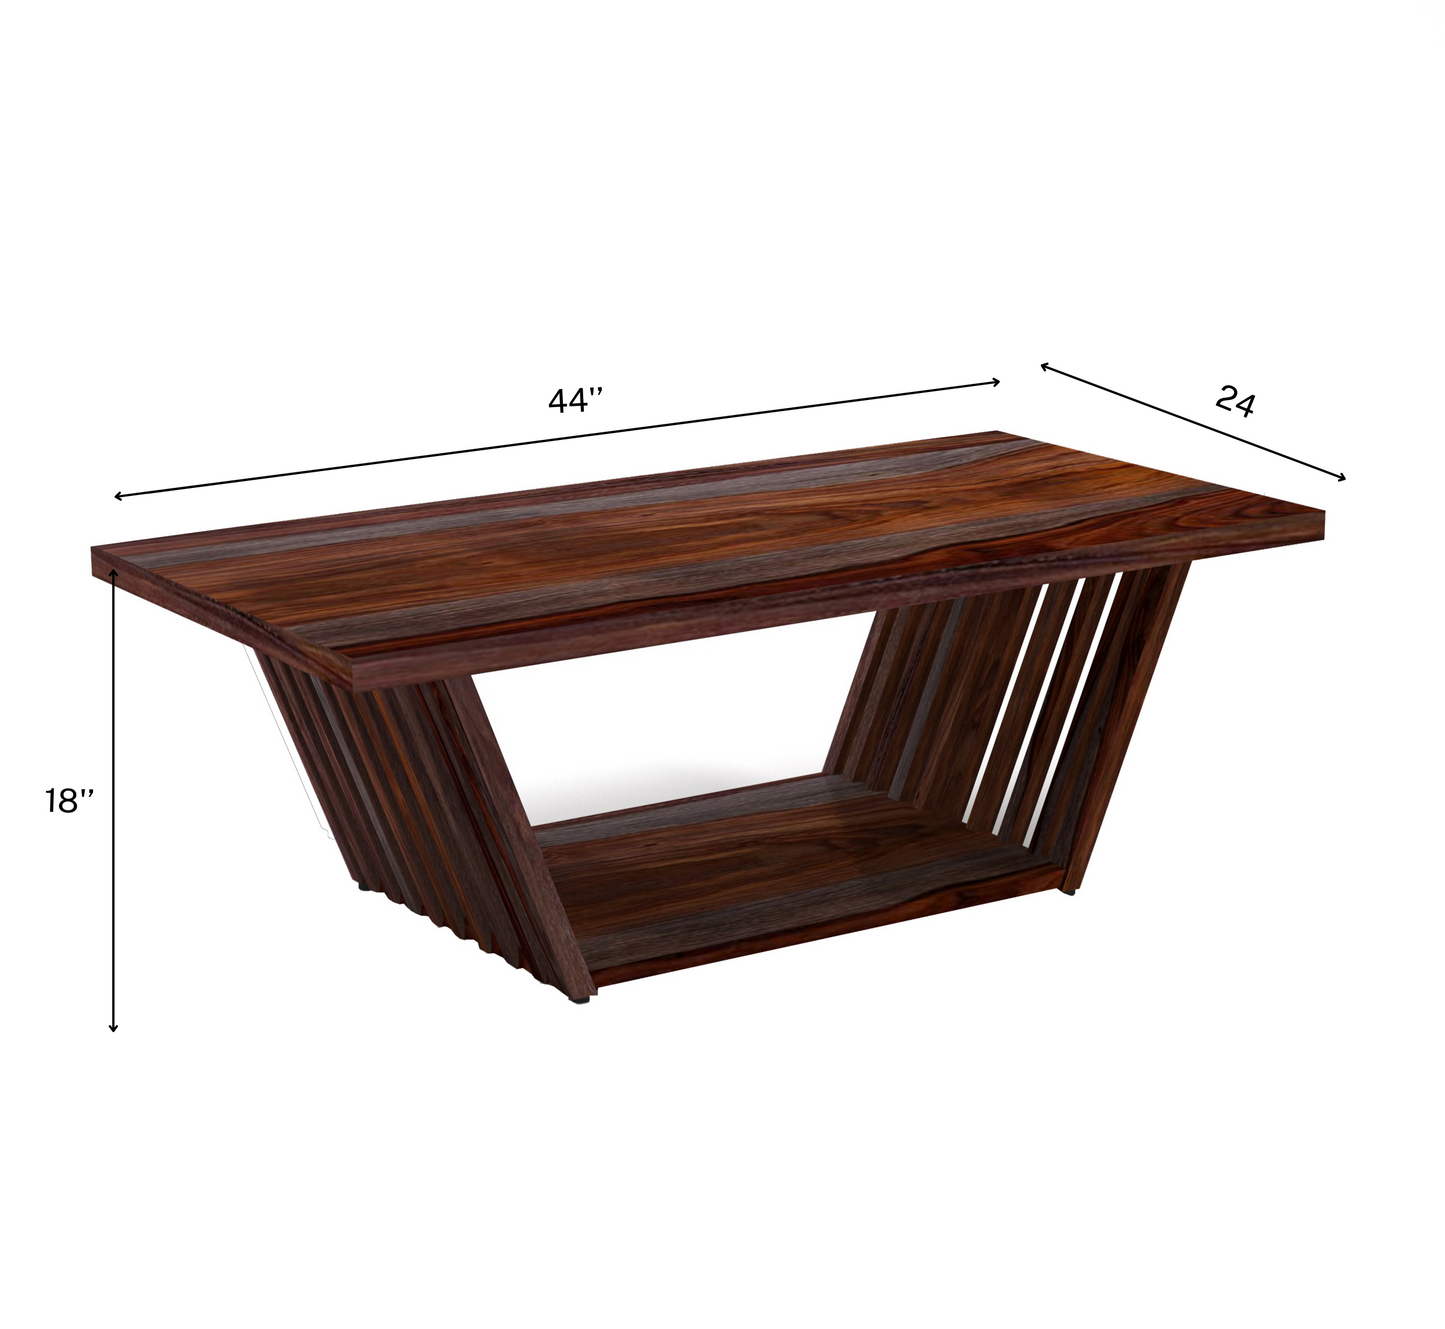 Sloan Wooden 2-Tier Centre Table